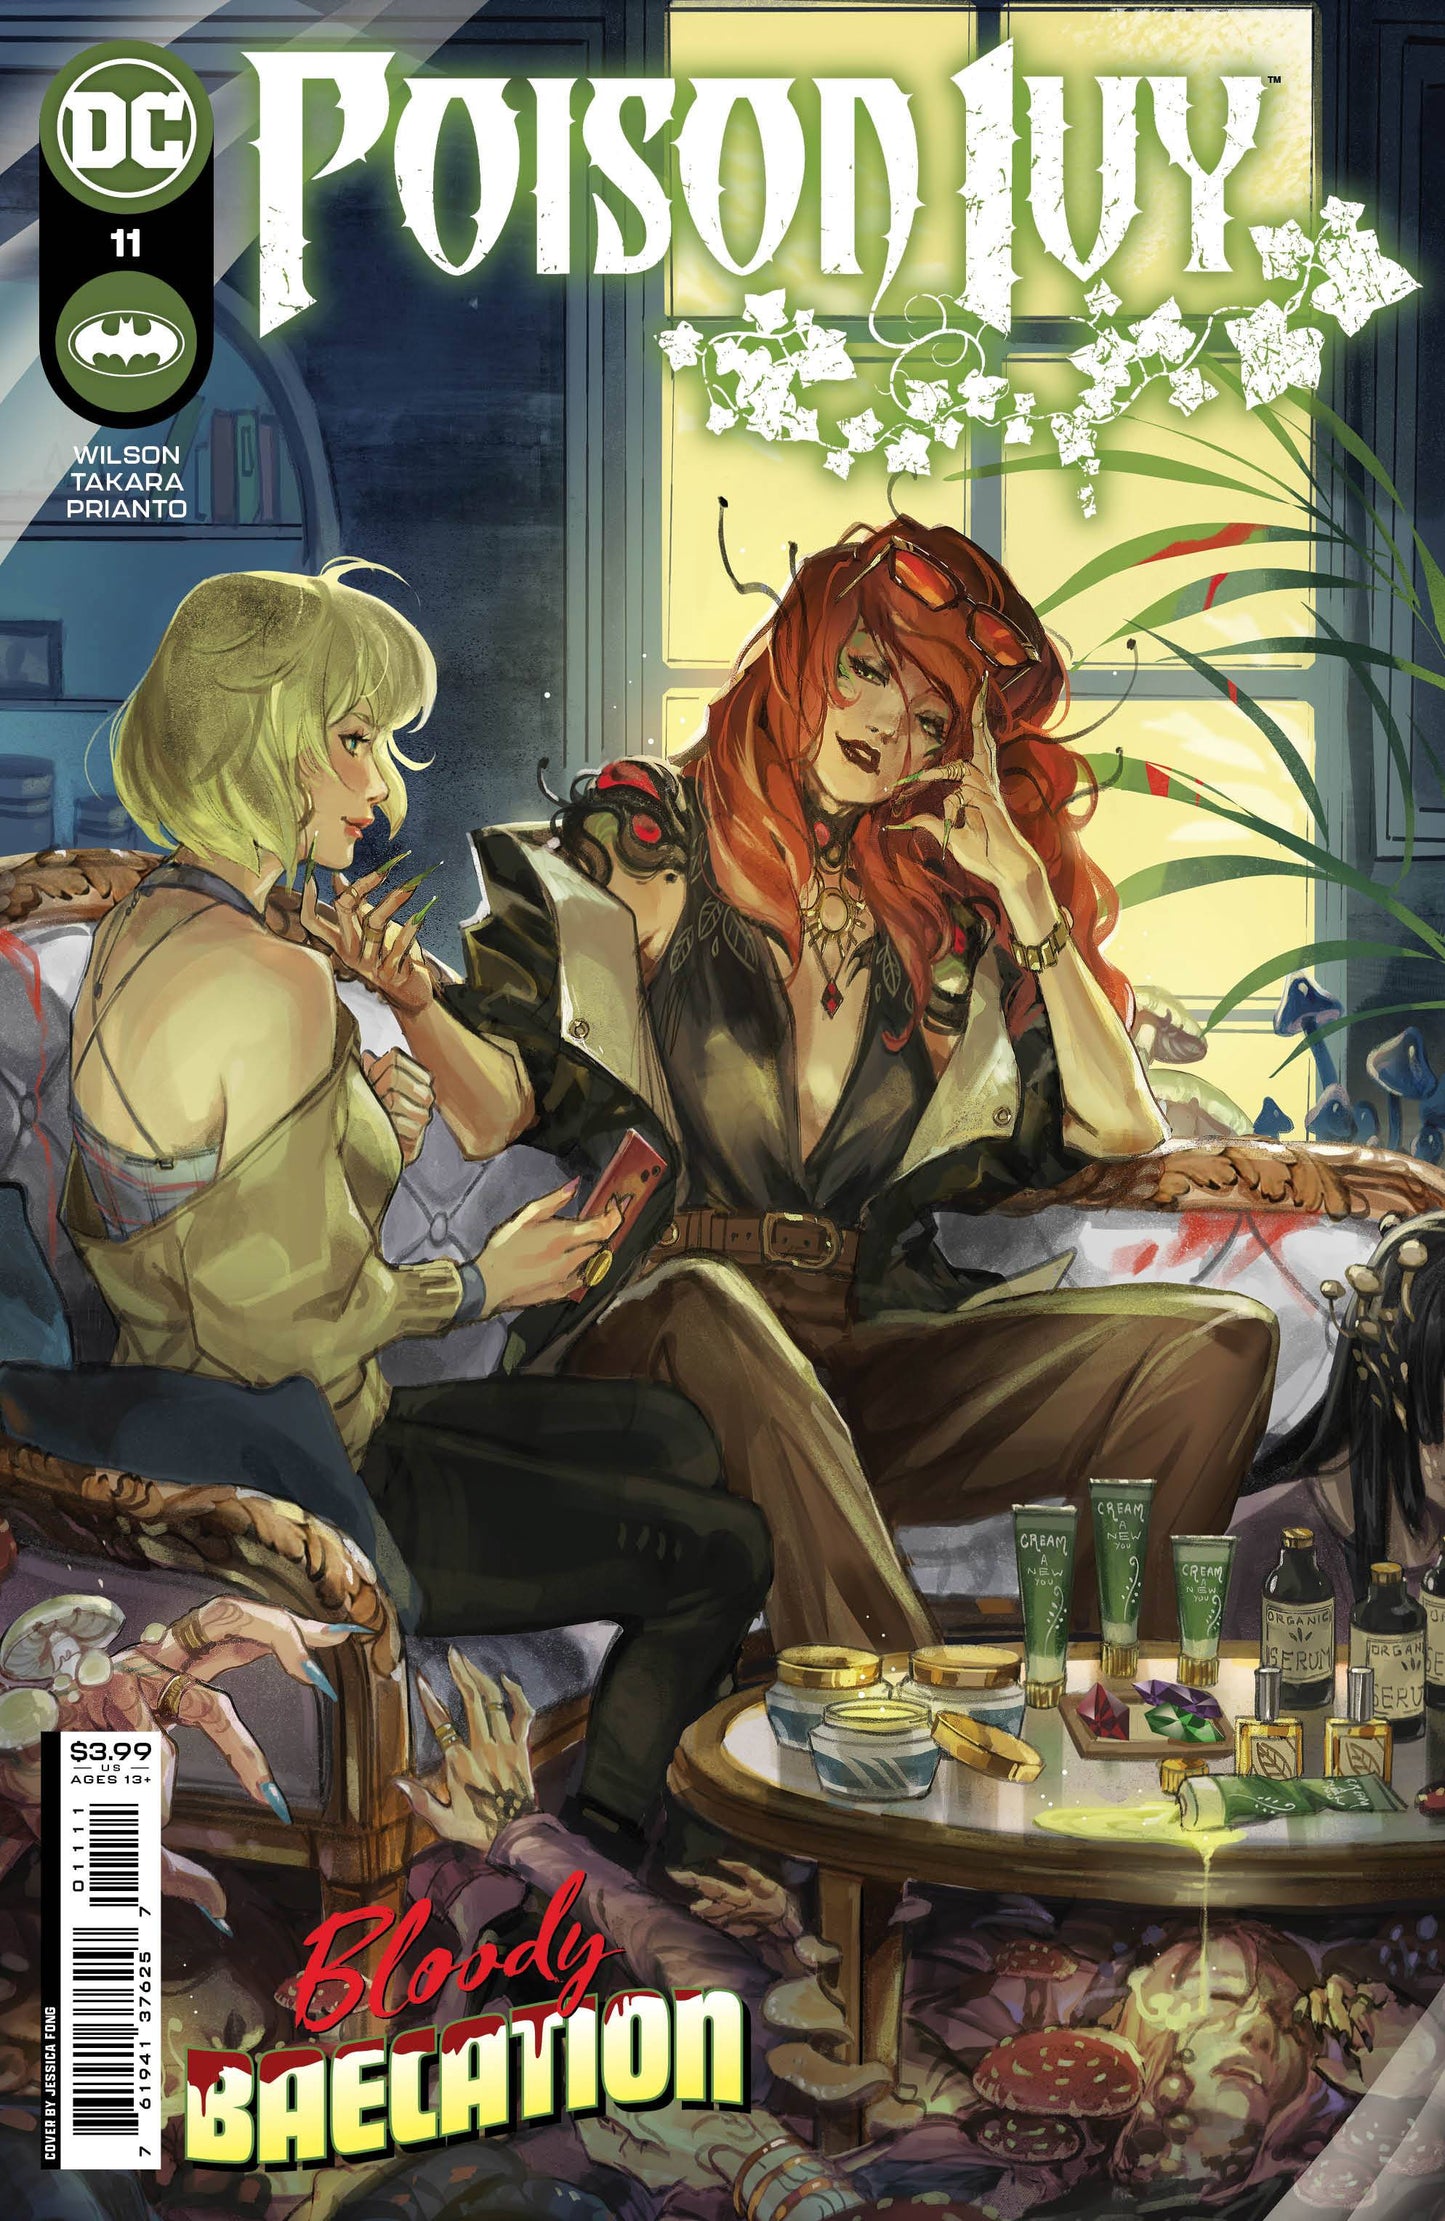 POISON IVY #11 |Select variant Cover |